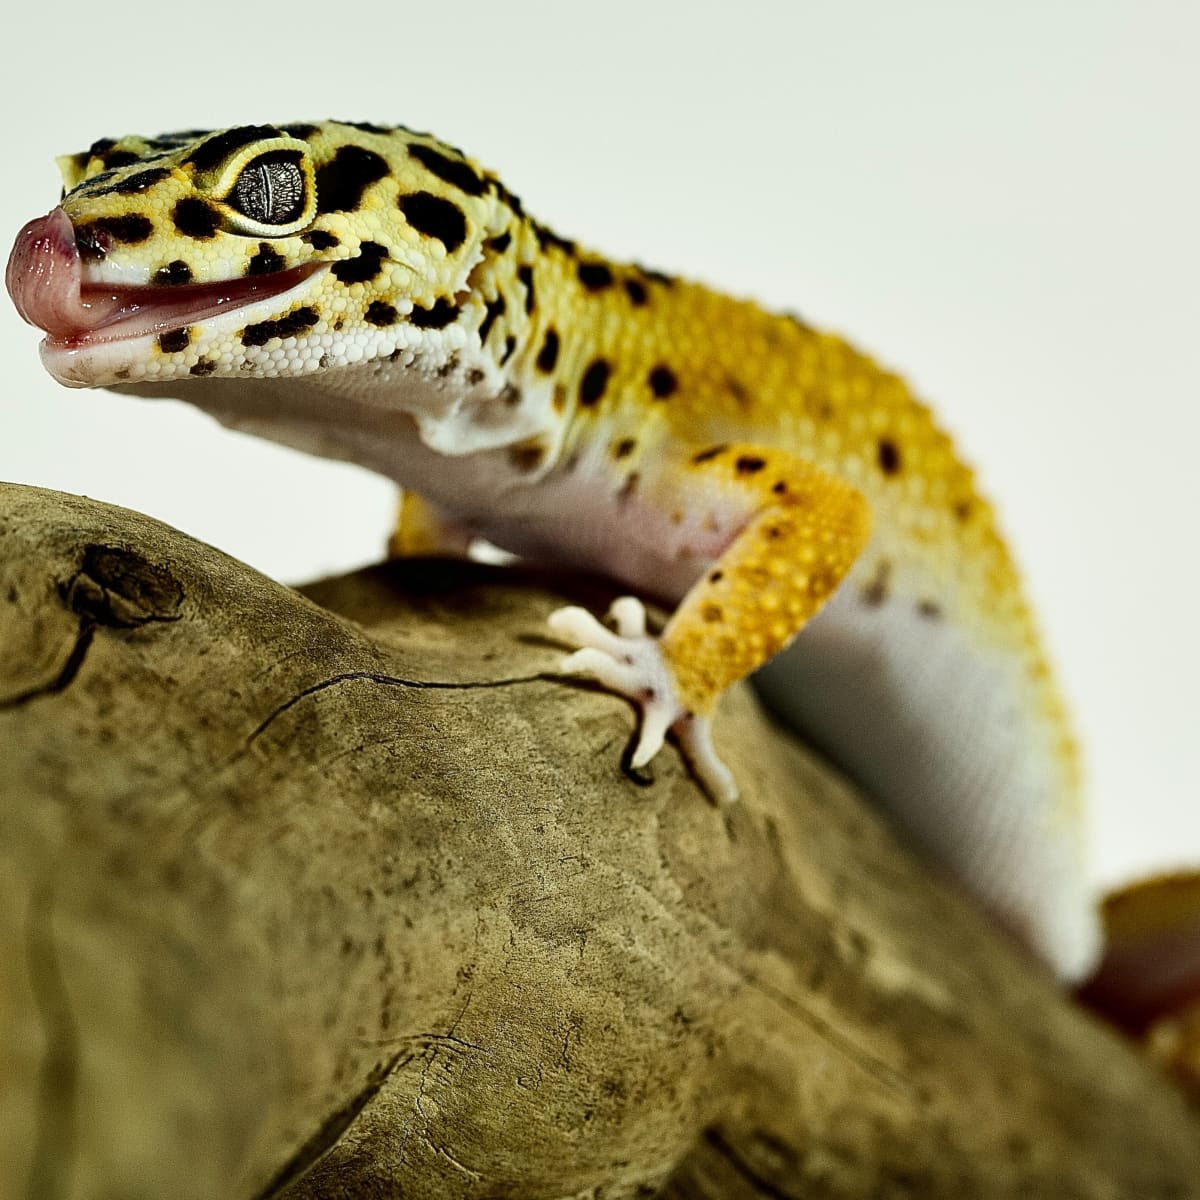 Leopard Geckos: Setting up a Natural Enclosure Like Their Native